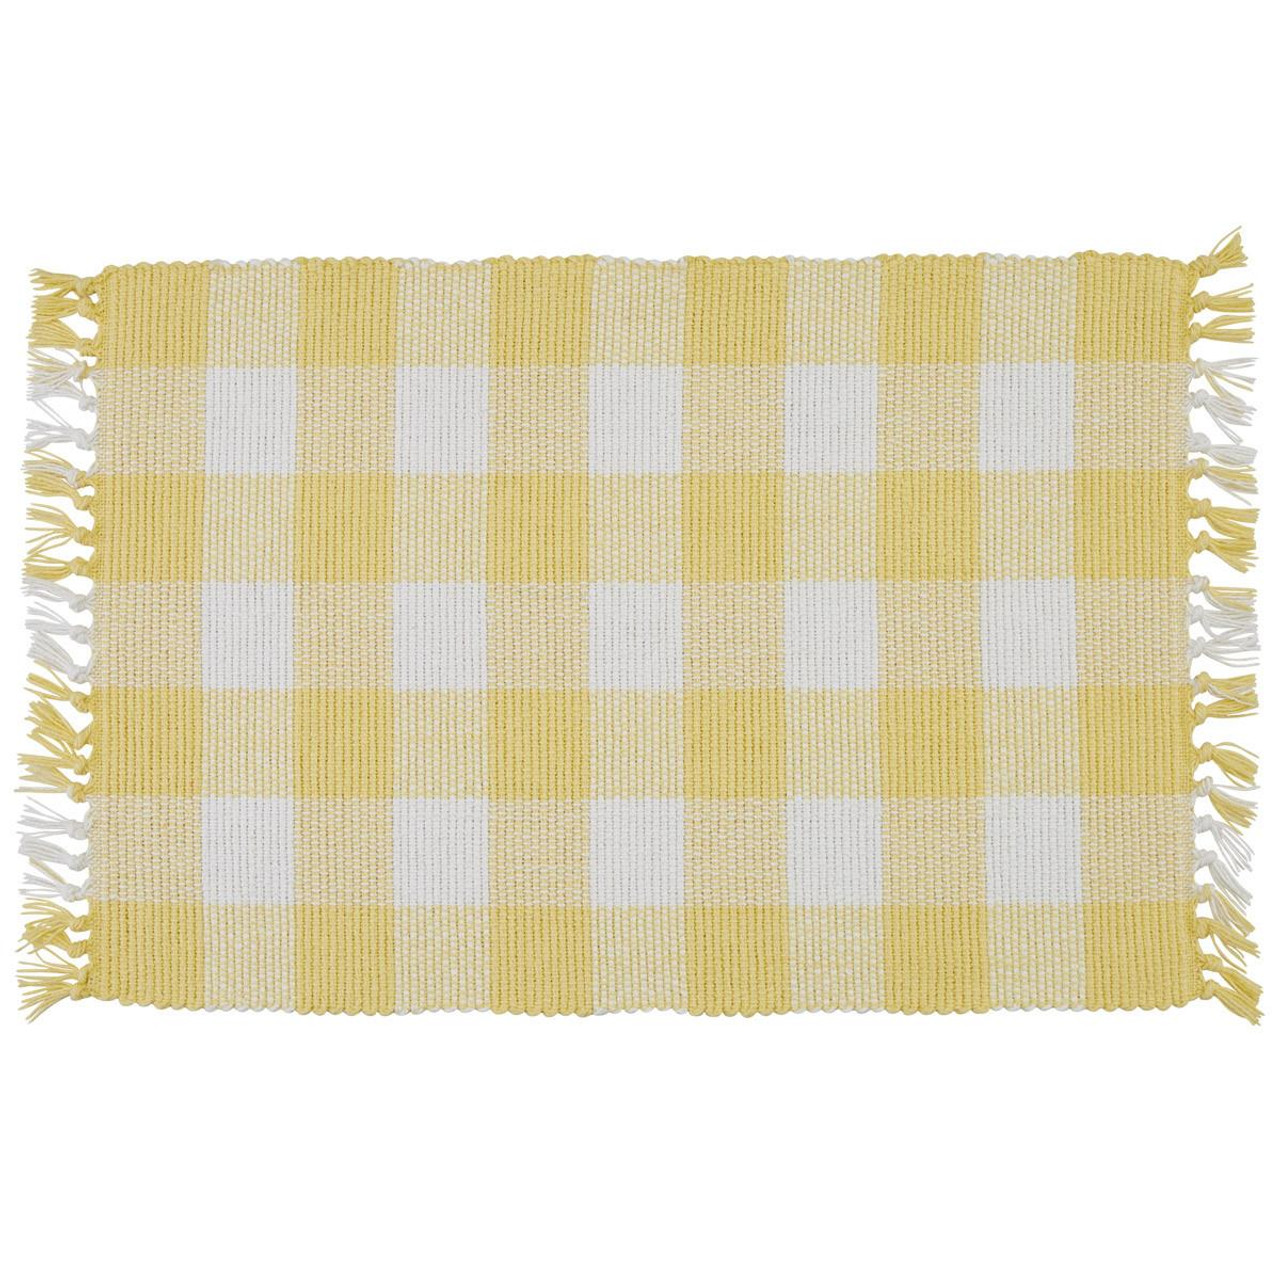 https://cdn11.bigcommerce.com/s-tfdhmk/images/stencil/1280x1280/products/22376/156696/Wicklow-Check-Placemats-Yellow-Set-of-6-762242036253_image1__24739.1667565292.jpg?c=2